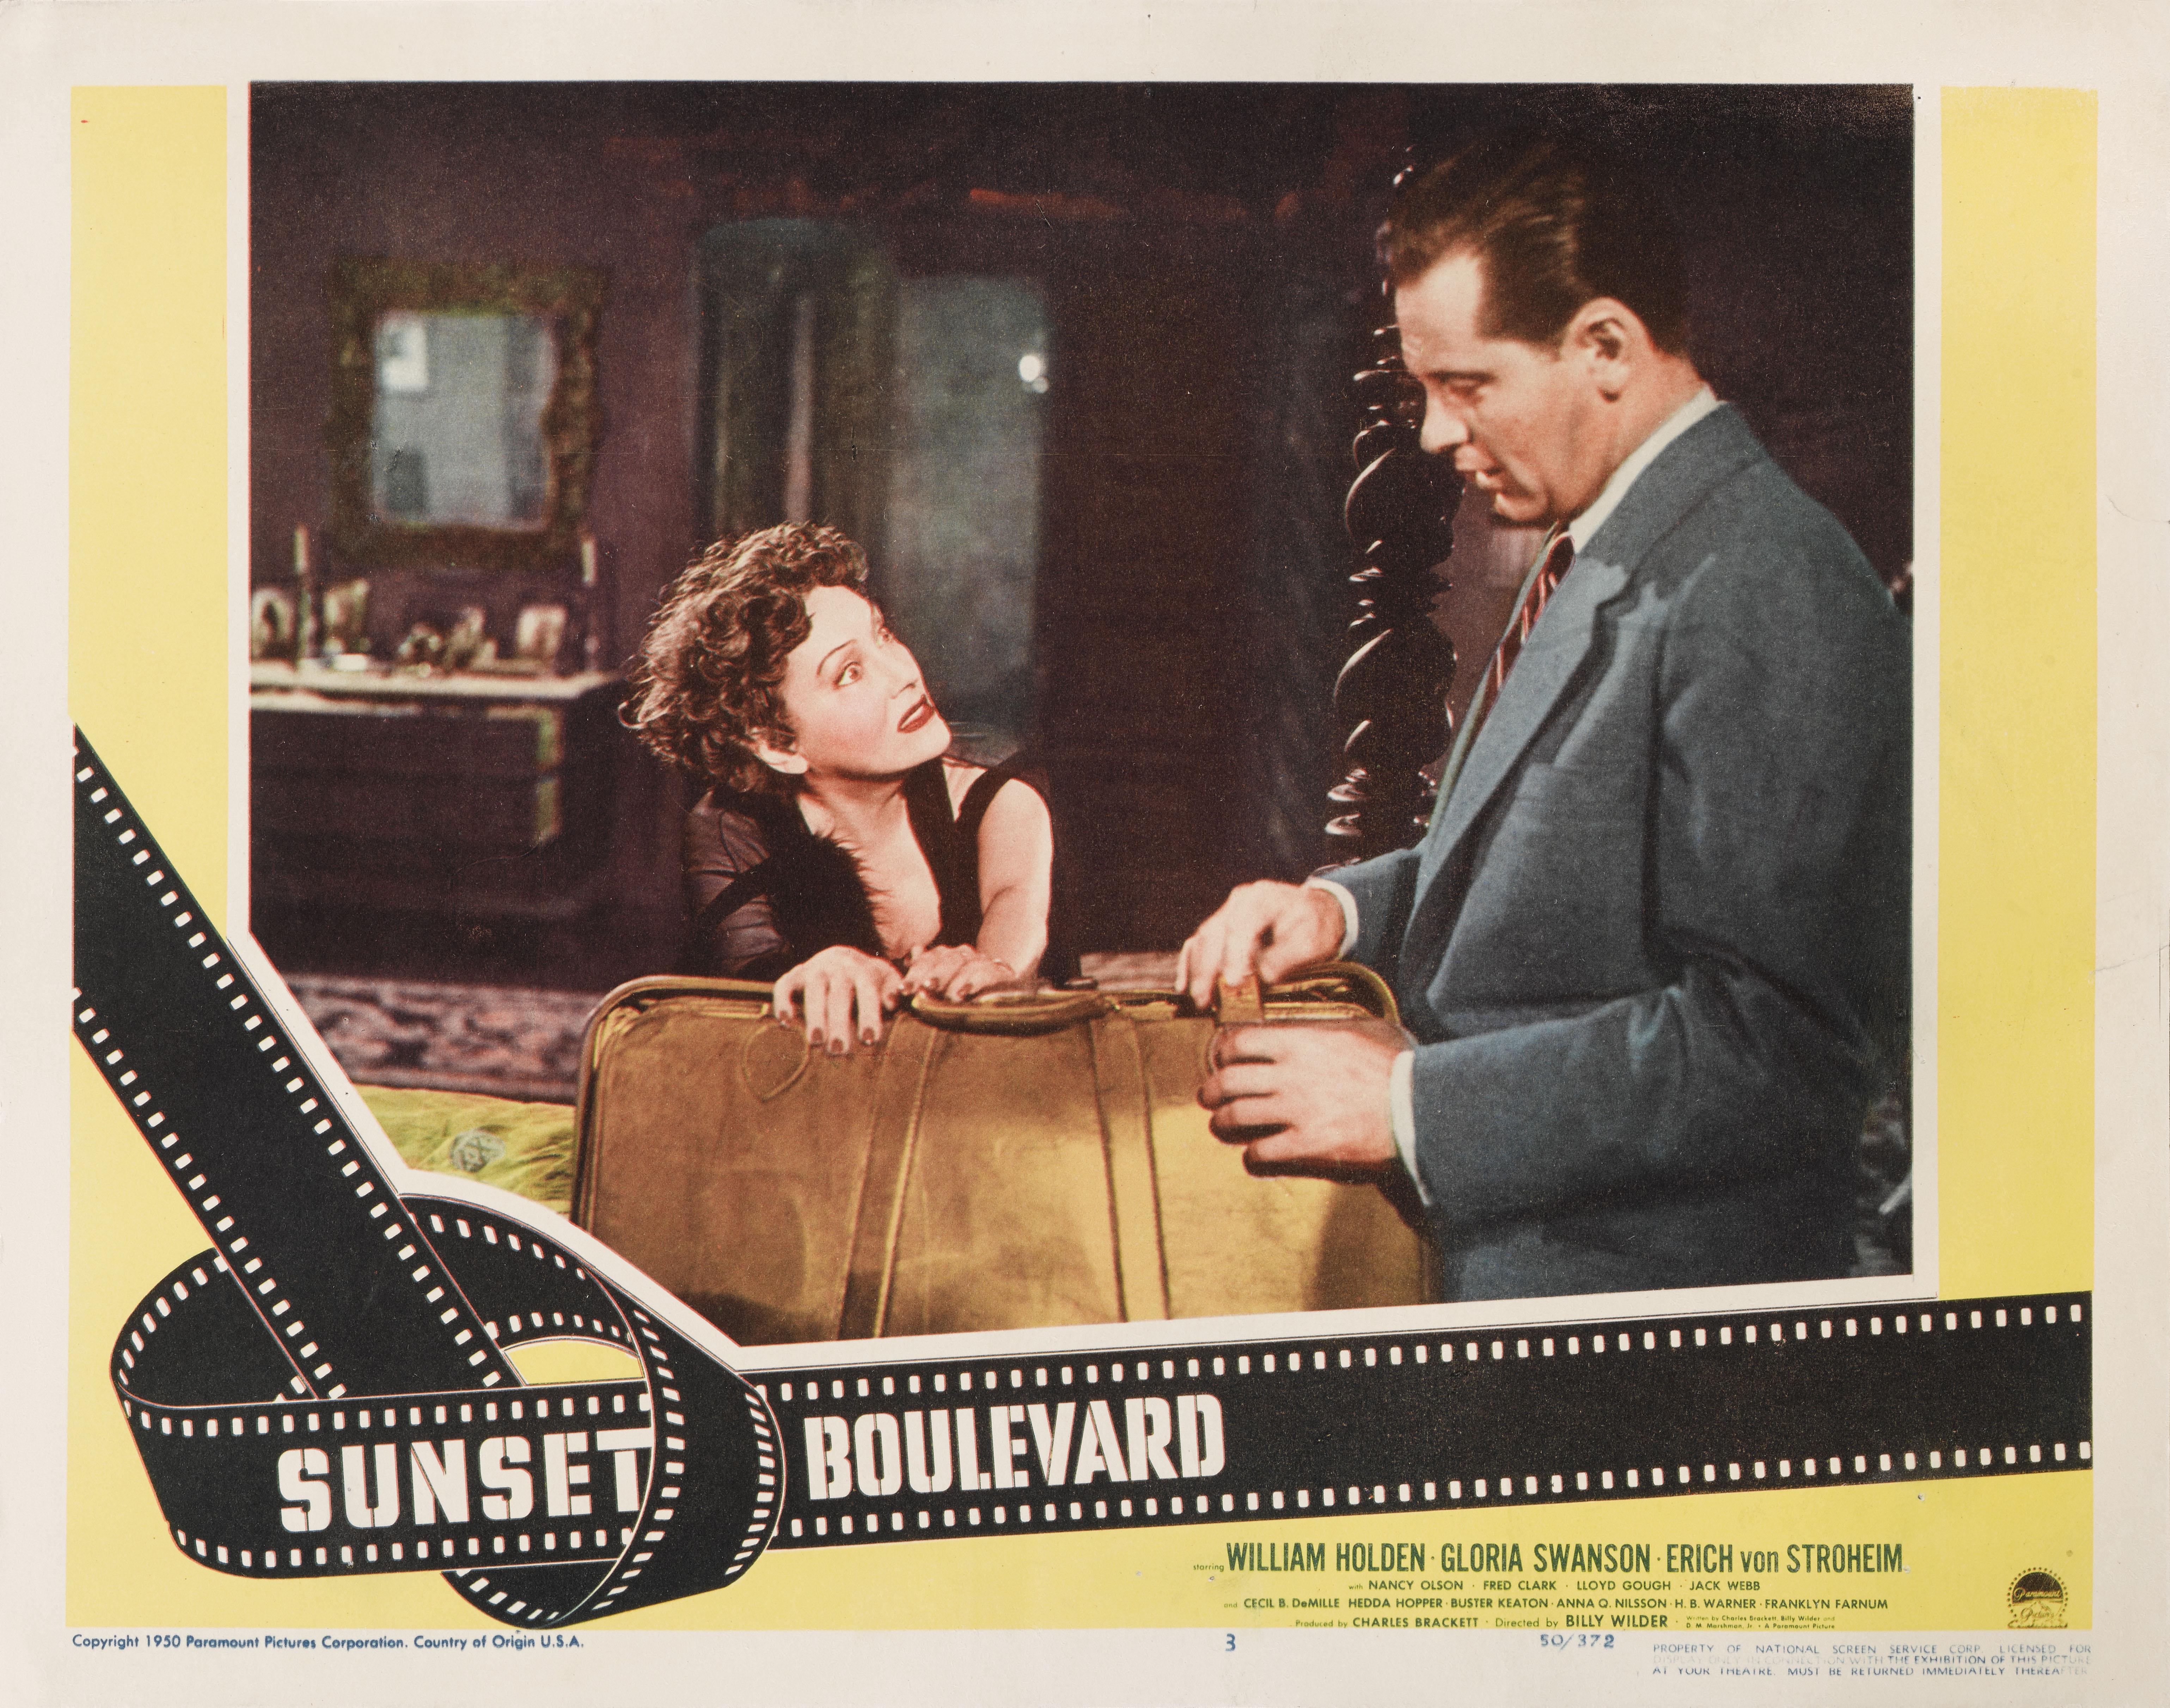 Original US lobby card number 3 for the American film noir directed and co-written by Billy Wilder, and produced and co-written by Charles Brackett. The film stars William Holden, Gloria Swanson and Errich von Stroheim. The film was nominated for